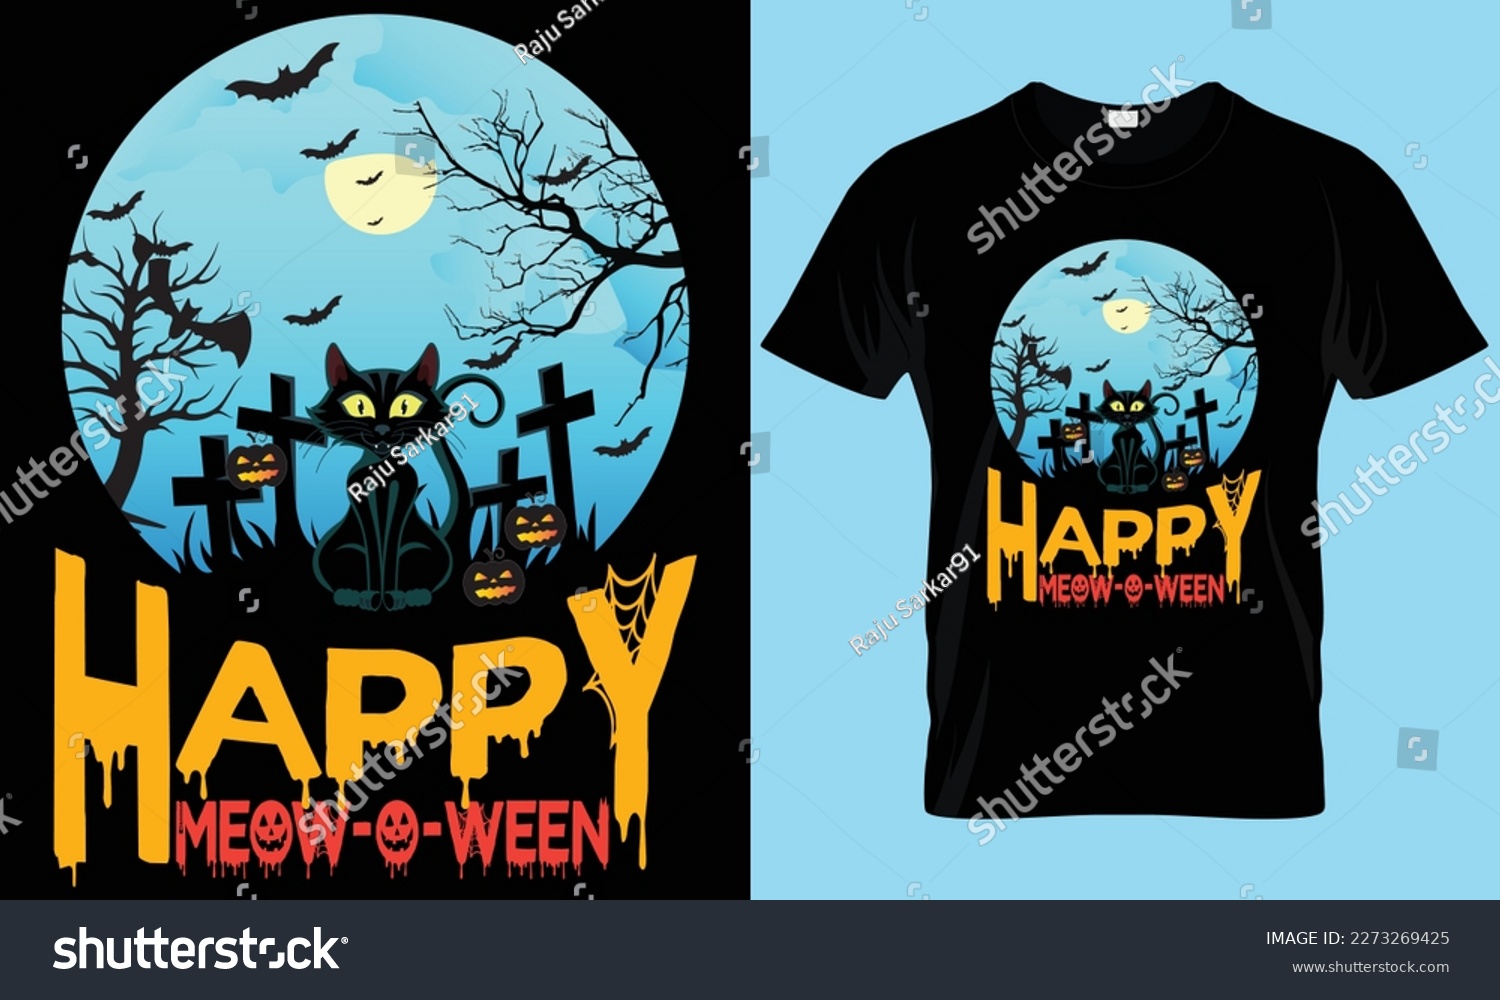 SVG of HAPPY MEOW O WEEN T-SHIRT DESIGN. HALLOWEEN T-SHIRT, TYPOGRAPHY AND CUSTOM T-SHIRT DESIGN. svg